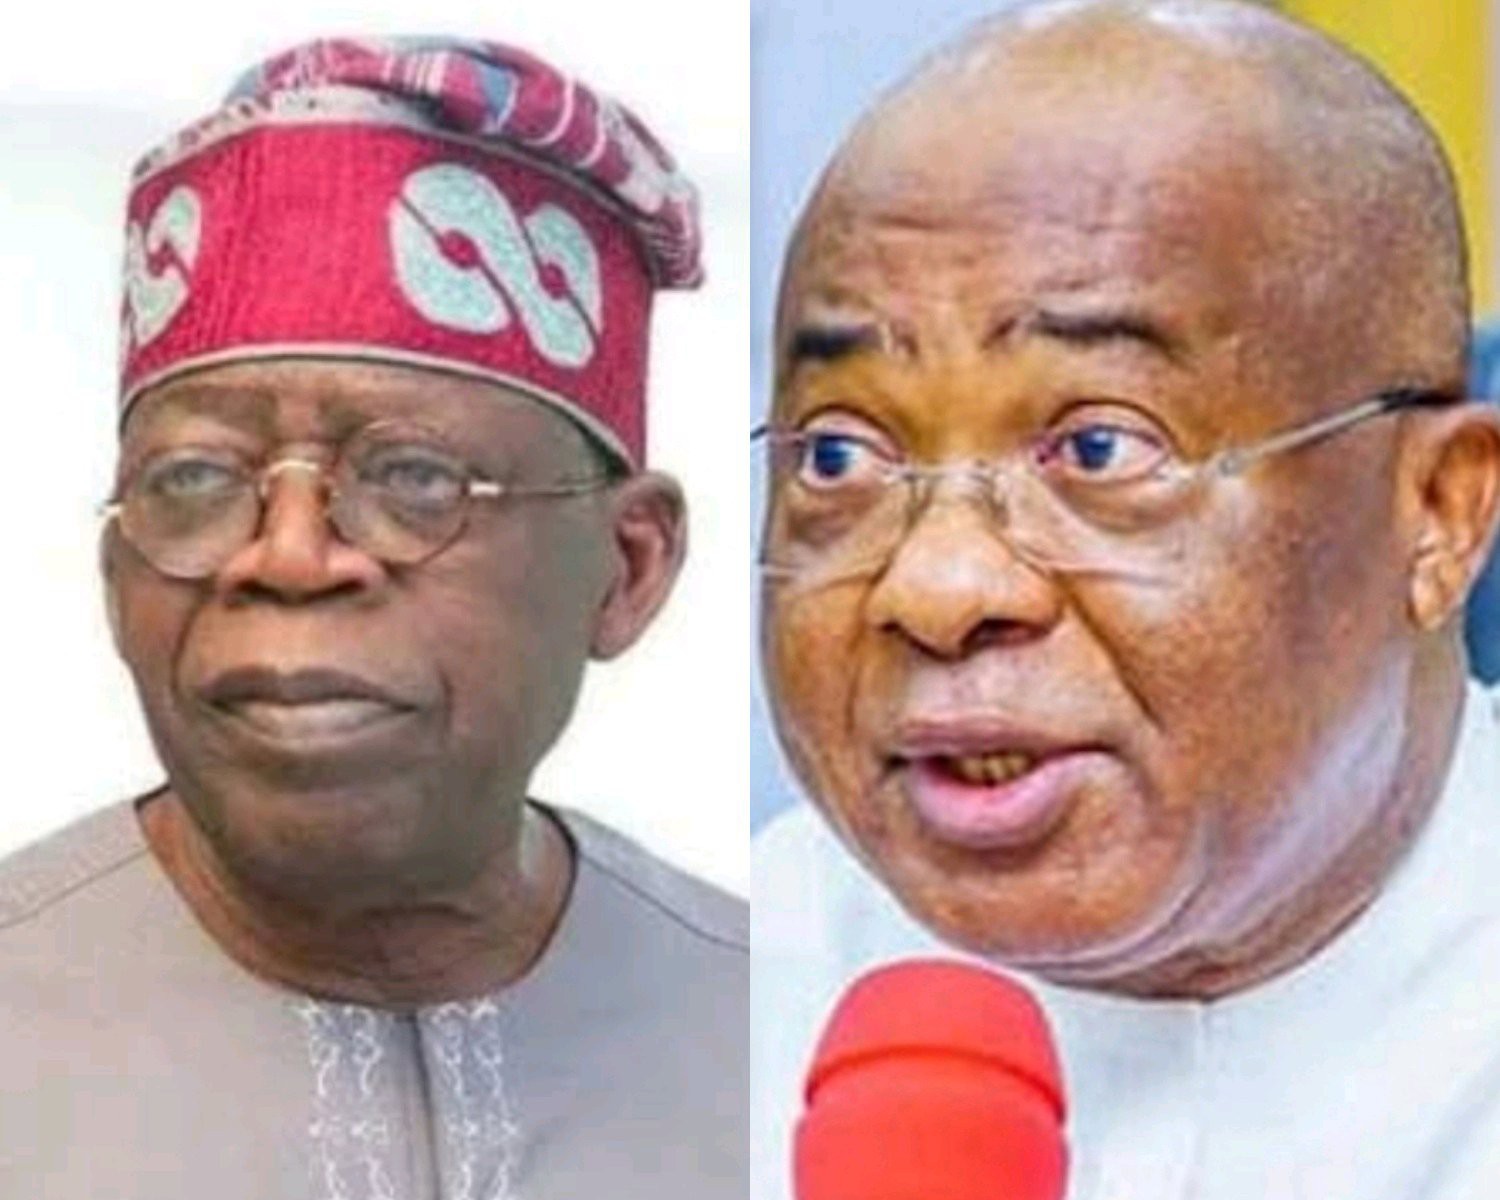 Imo: According to Tinubu, Uzodinma has just gone into the record book for winning in all 27 LGAs